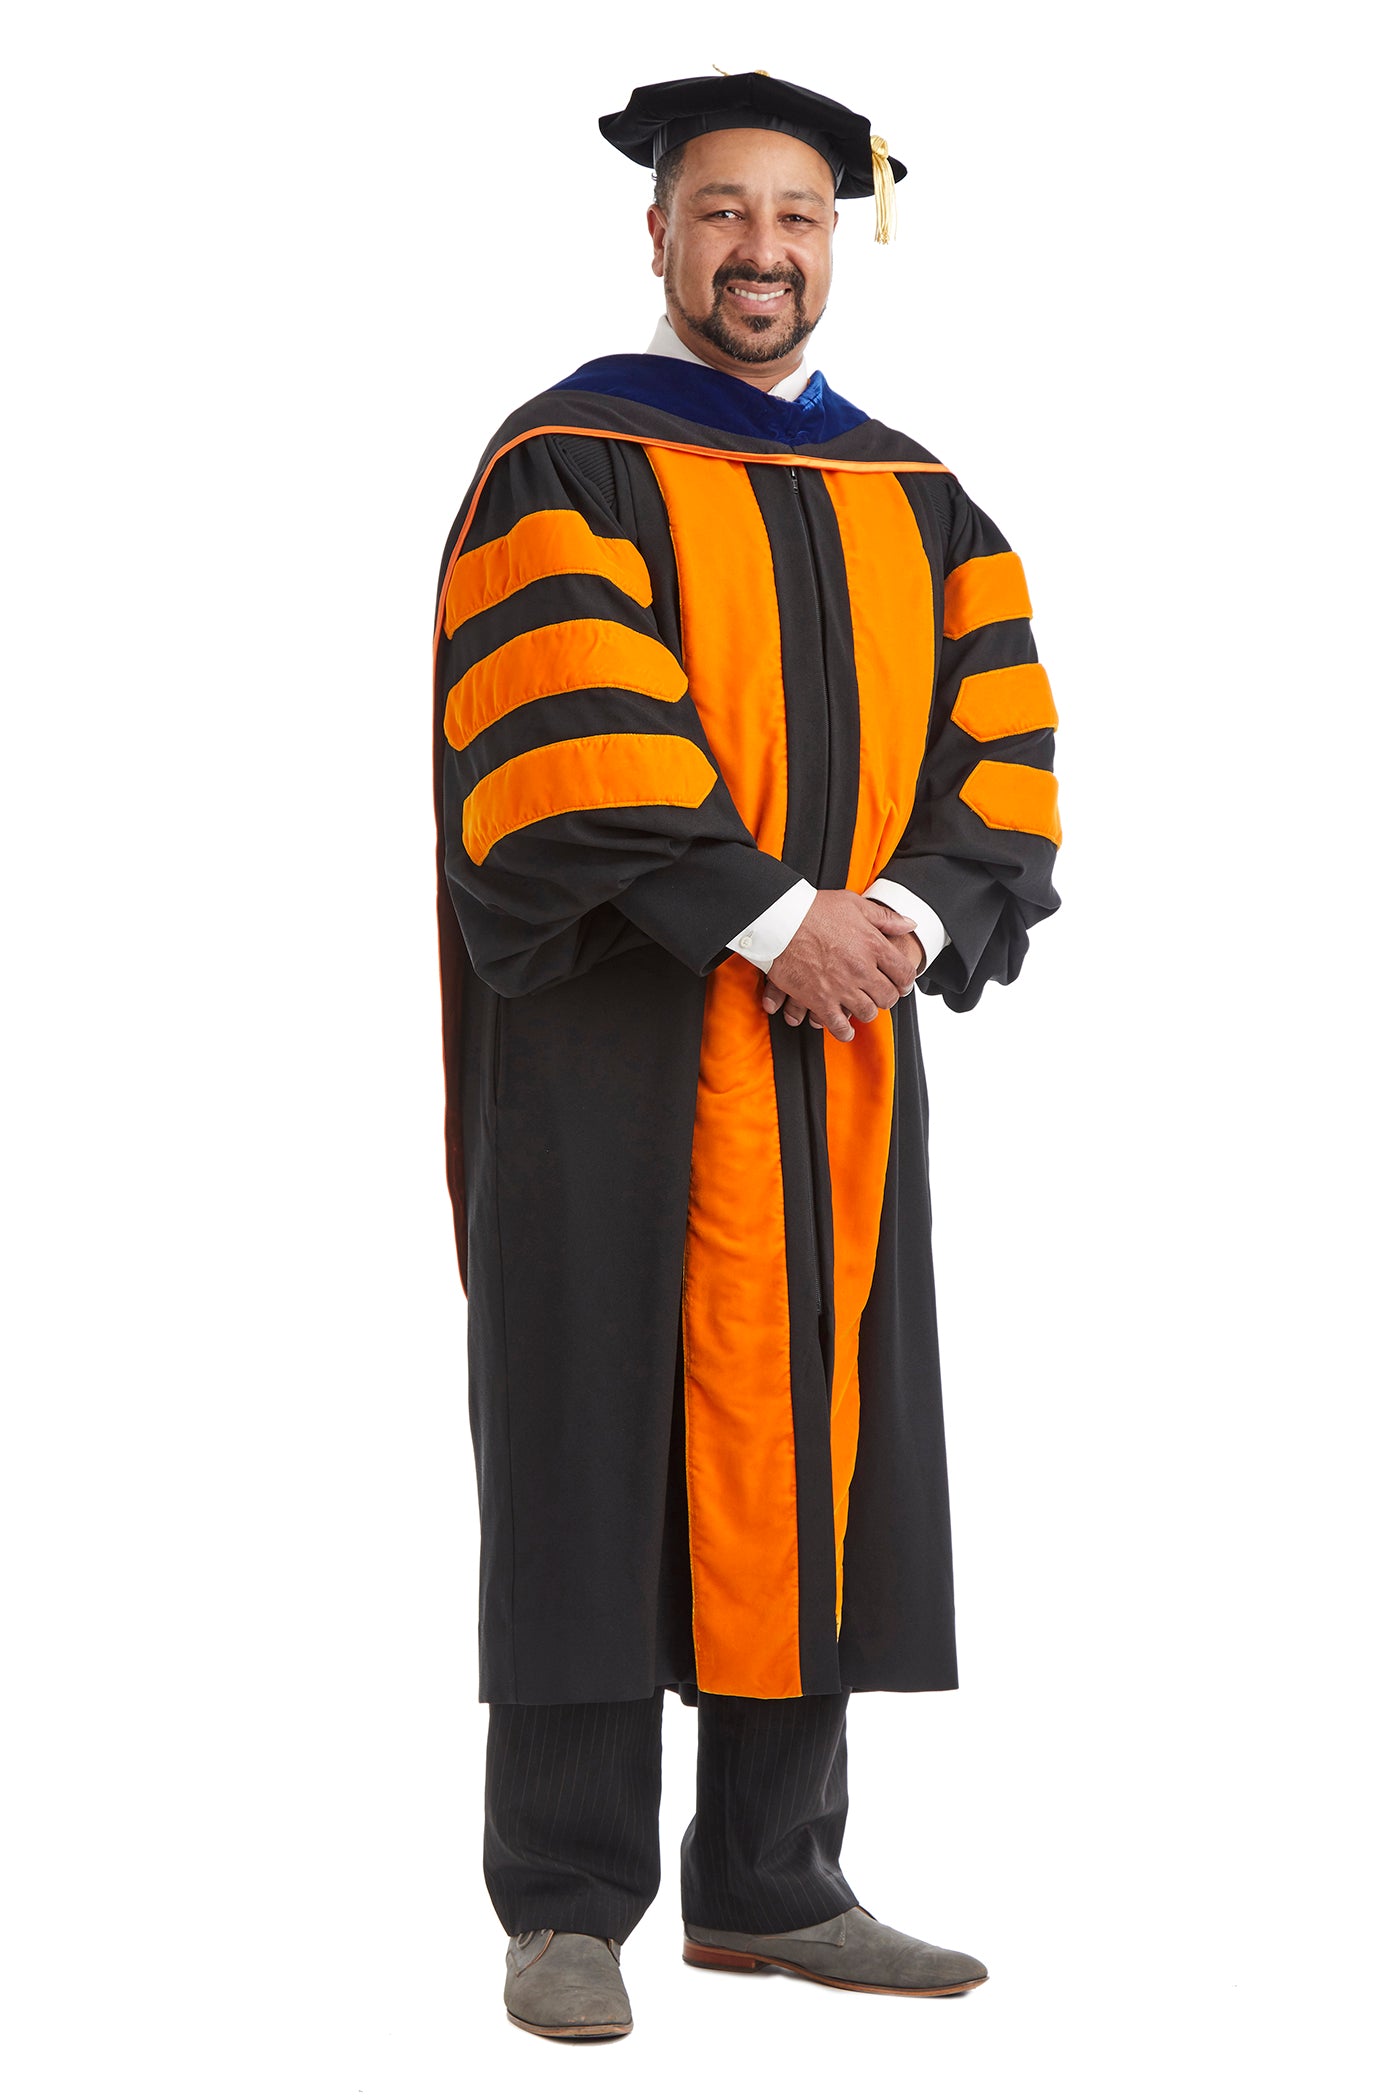 Princeton University Doctoral Regalia Rental Set. Doctoral Gown, PhD Hood, and Eight Sided Doctoral Tam with Tassel